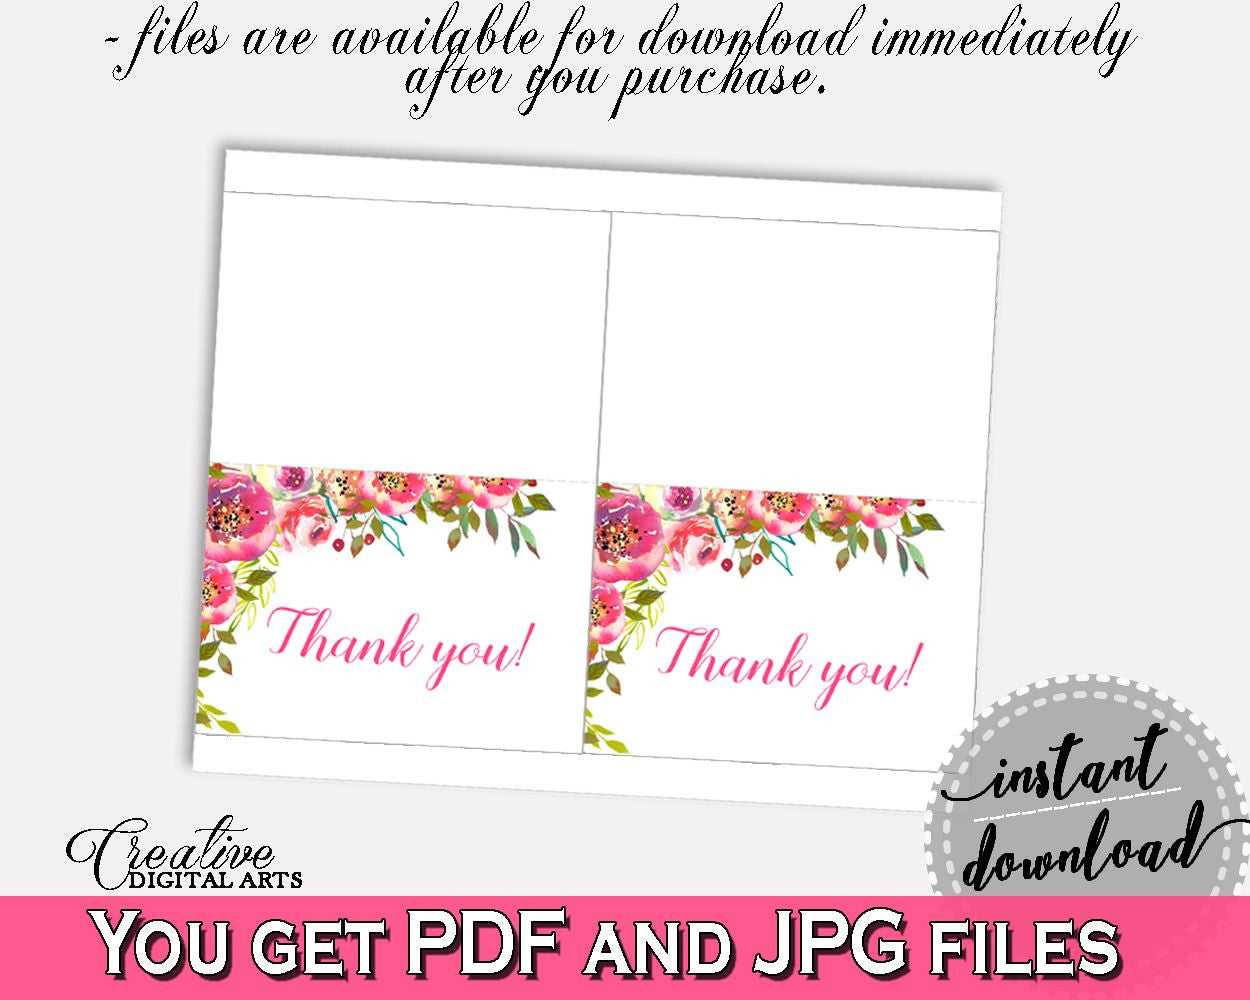 Thank You Card Bridal Shower Thank You Card Spring Flowers Bridal Shower Thank You Card Bridal Shower Spring Flowers Thank You Card UY5IG - Digital Product